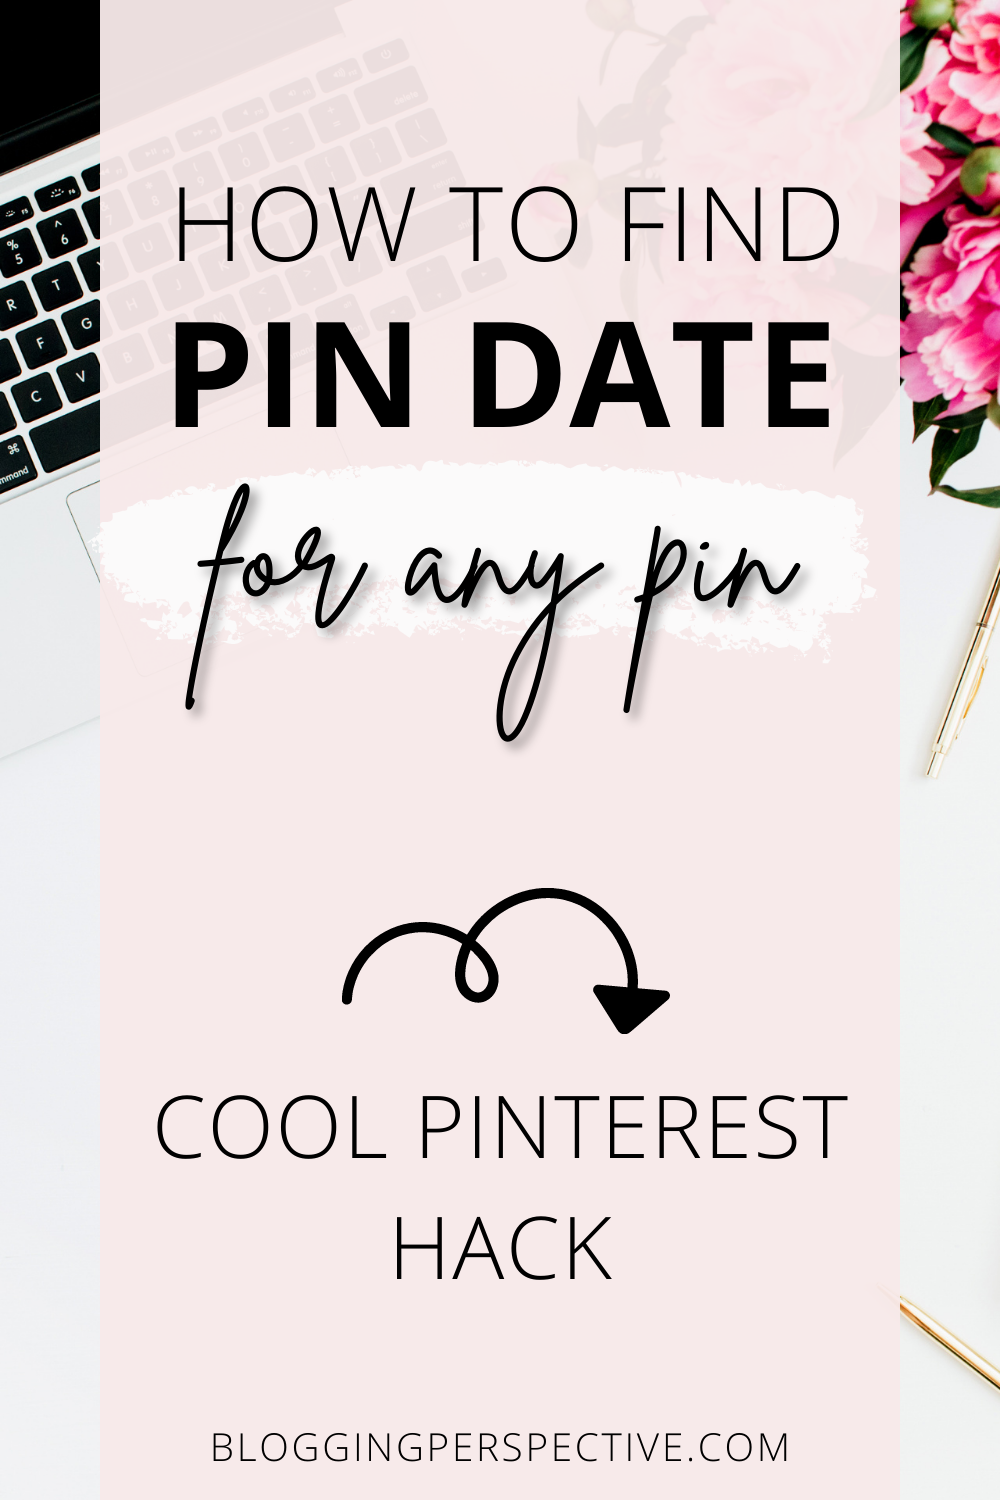 How to find pin date on Pinterest - Cool Pinterest hack!